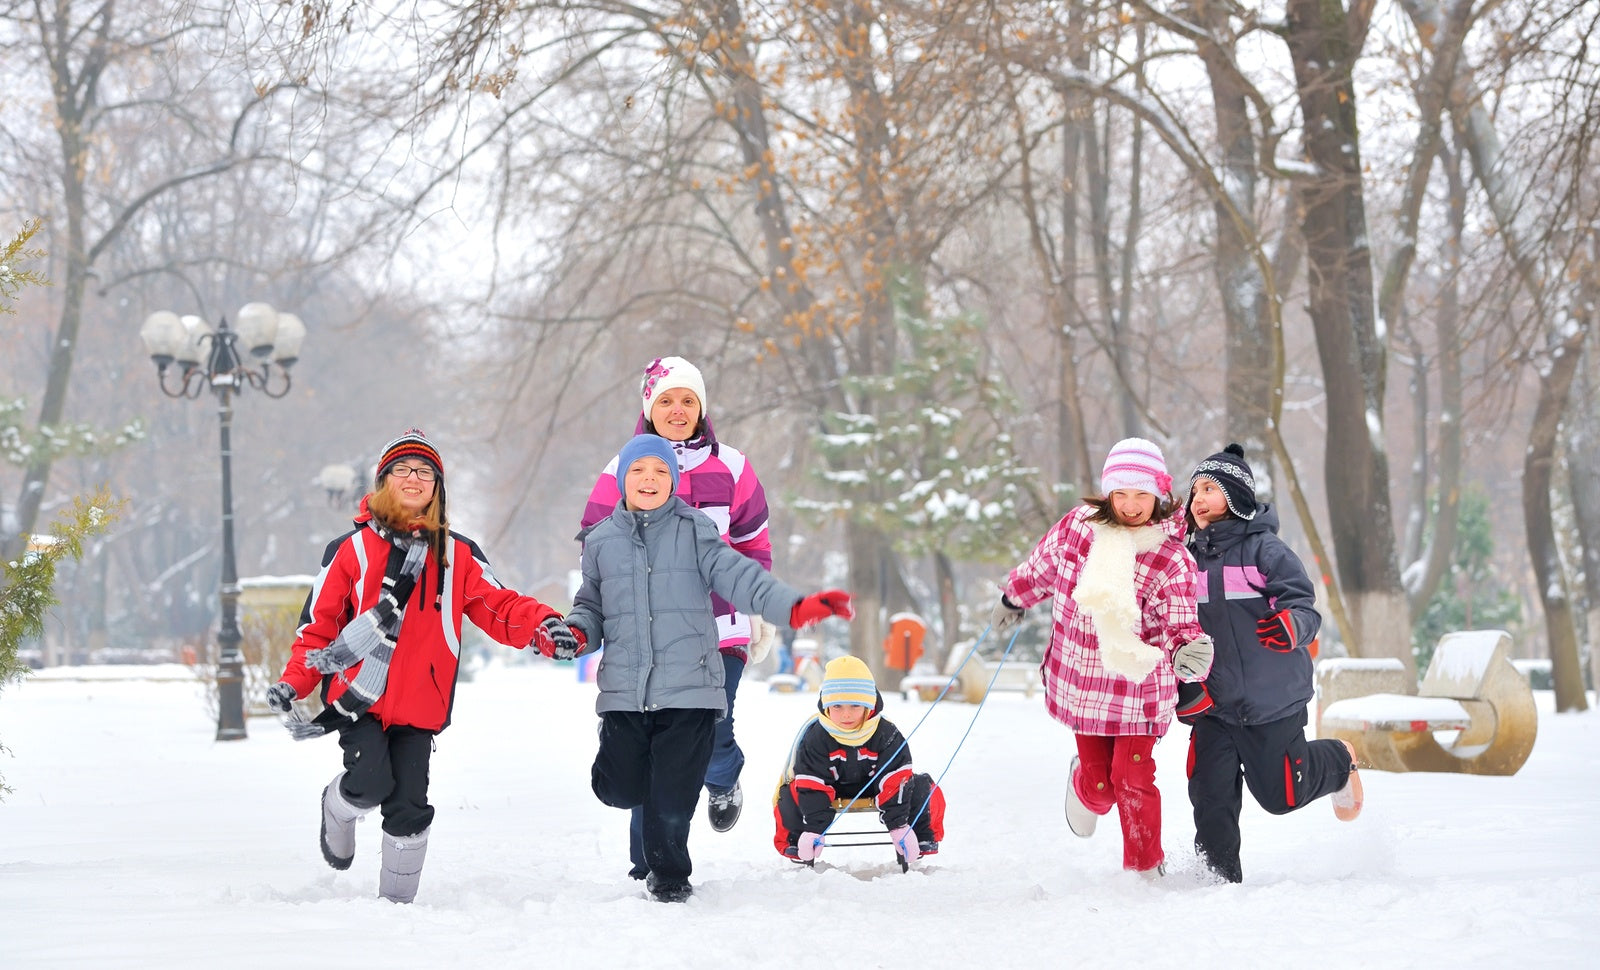 The Best Ways to Spend a Snow Day With Your Kids